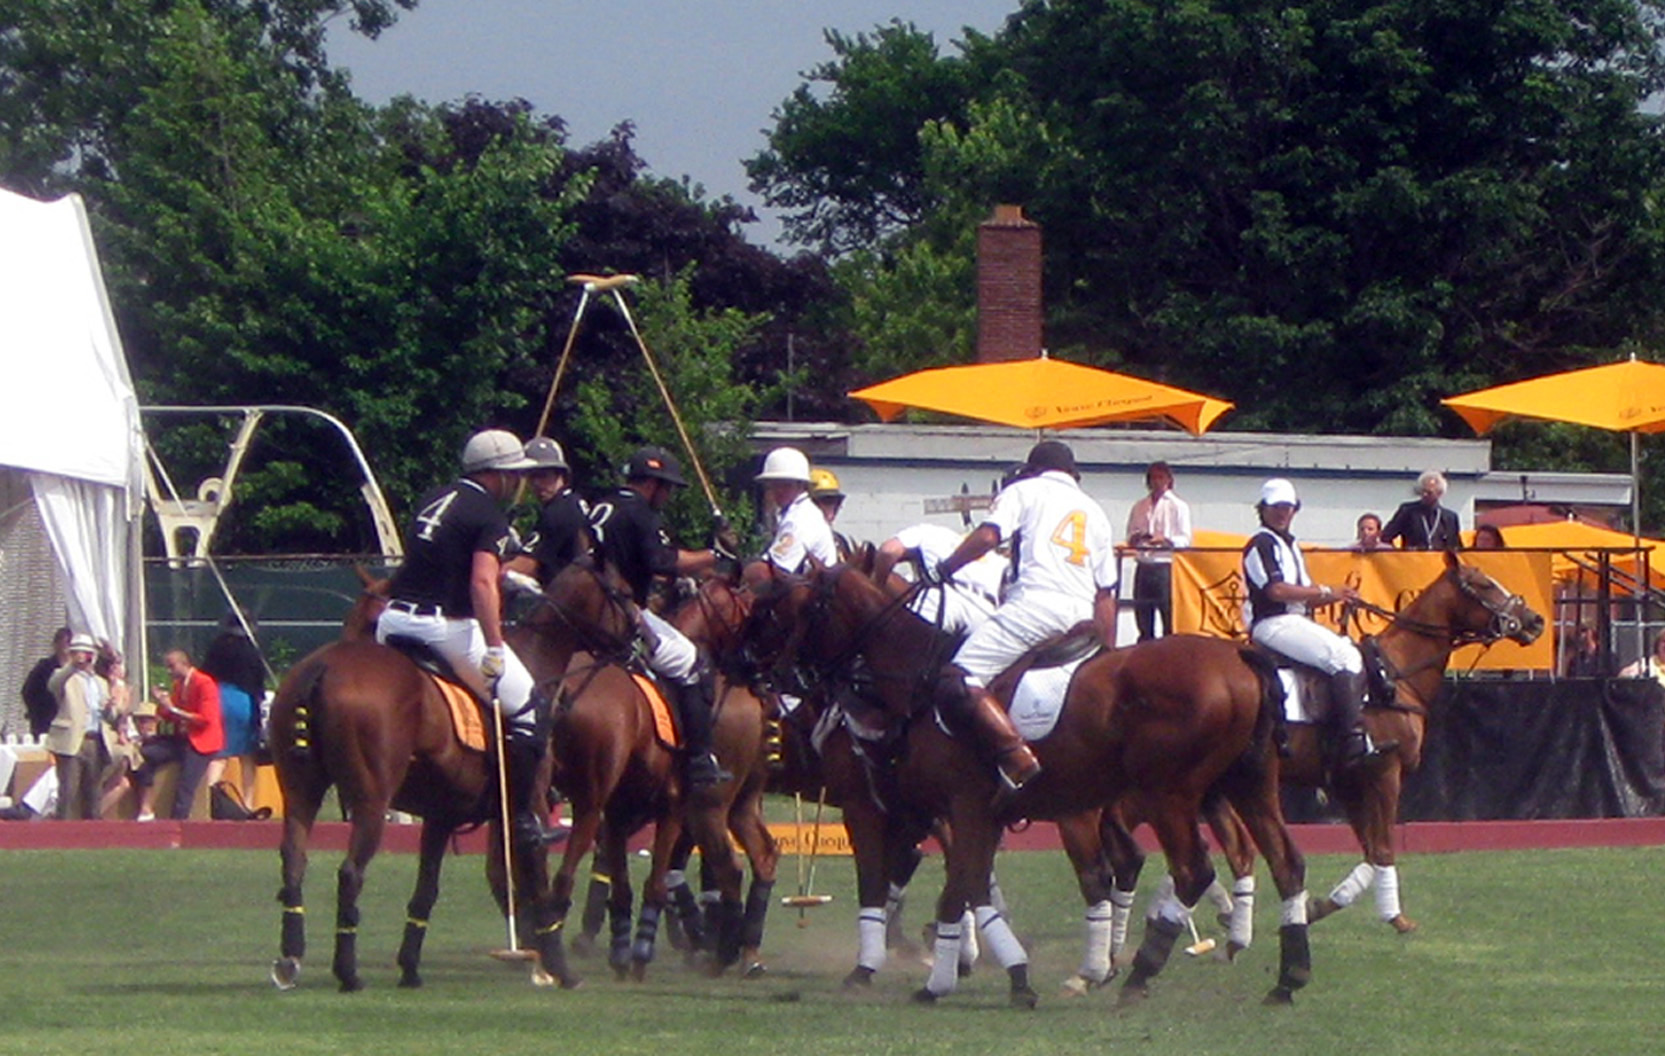 polo07 - CELEB POLO MATCH BRINGS OUT GRACE, GLAMOUR AND BEAUTY